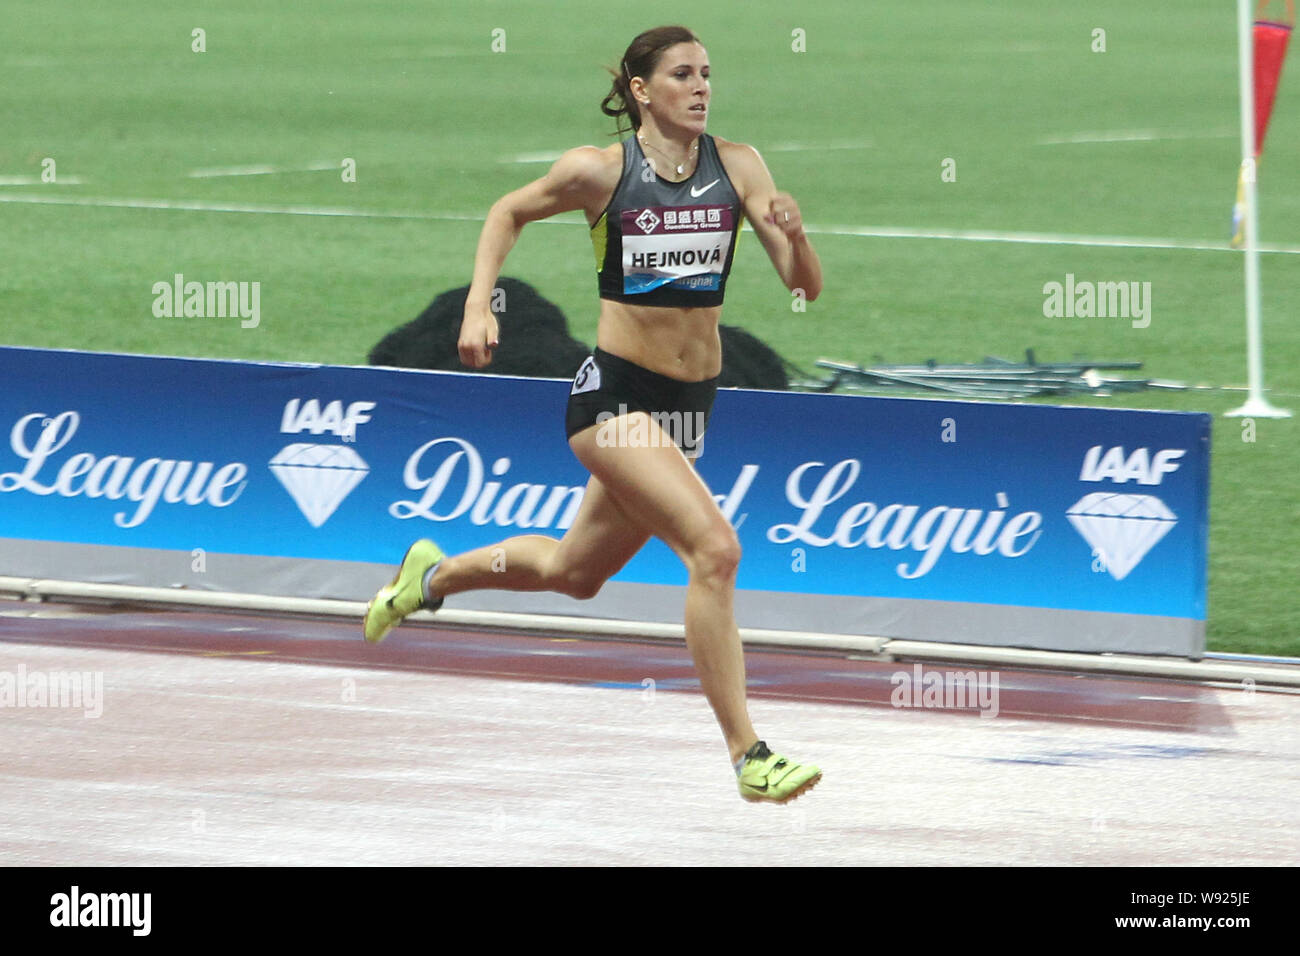 Zuzana Hejnova of The Czech Republic competes in the womens 400m hurdles event at the 2013 IAAF Diamond League in Shanghai, China, 18 May 2013. Stock Photo